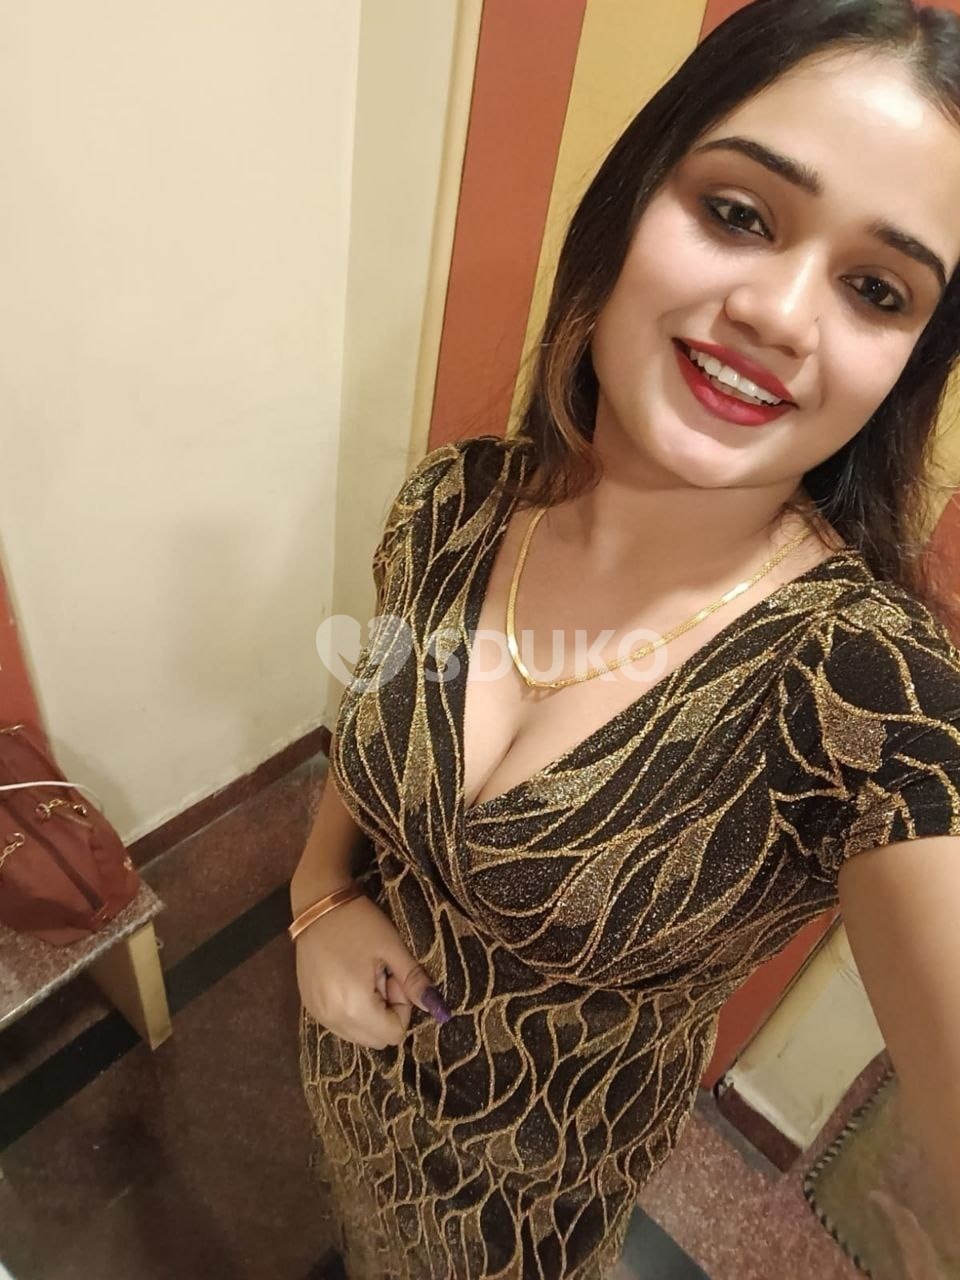 Ameerpet..low price 🥰100% SAFE AND SECURE TODAY LOW PRICE UNLIMITED ENJOY HOT COLLEGE GIRL HOUSEWIFE AUNTIES AVAILABL